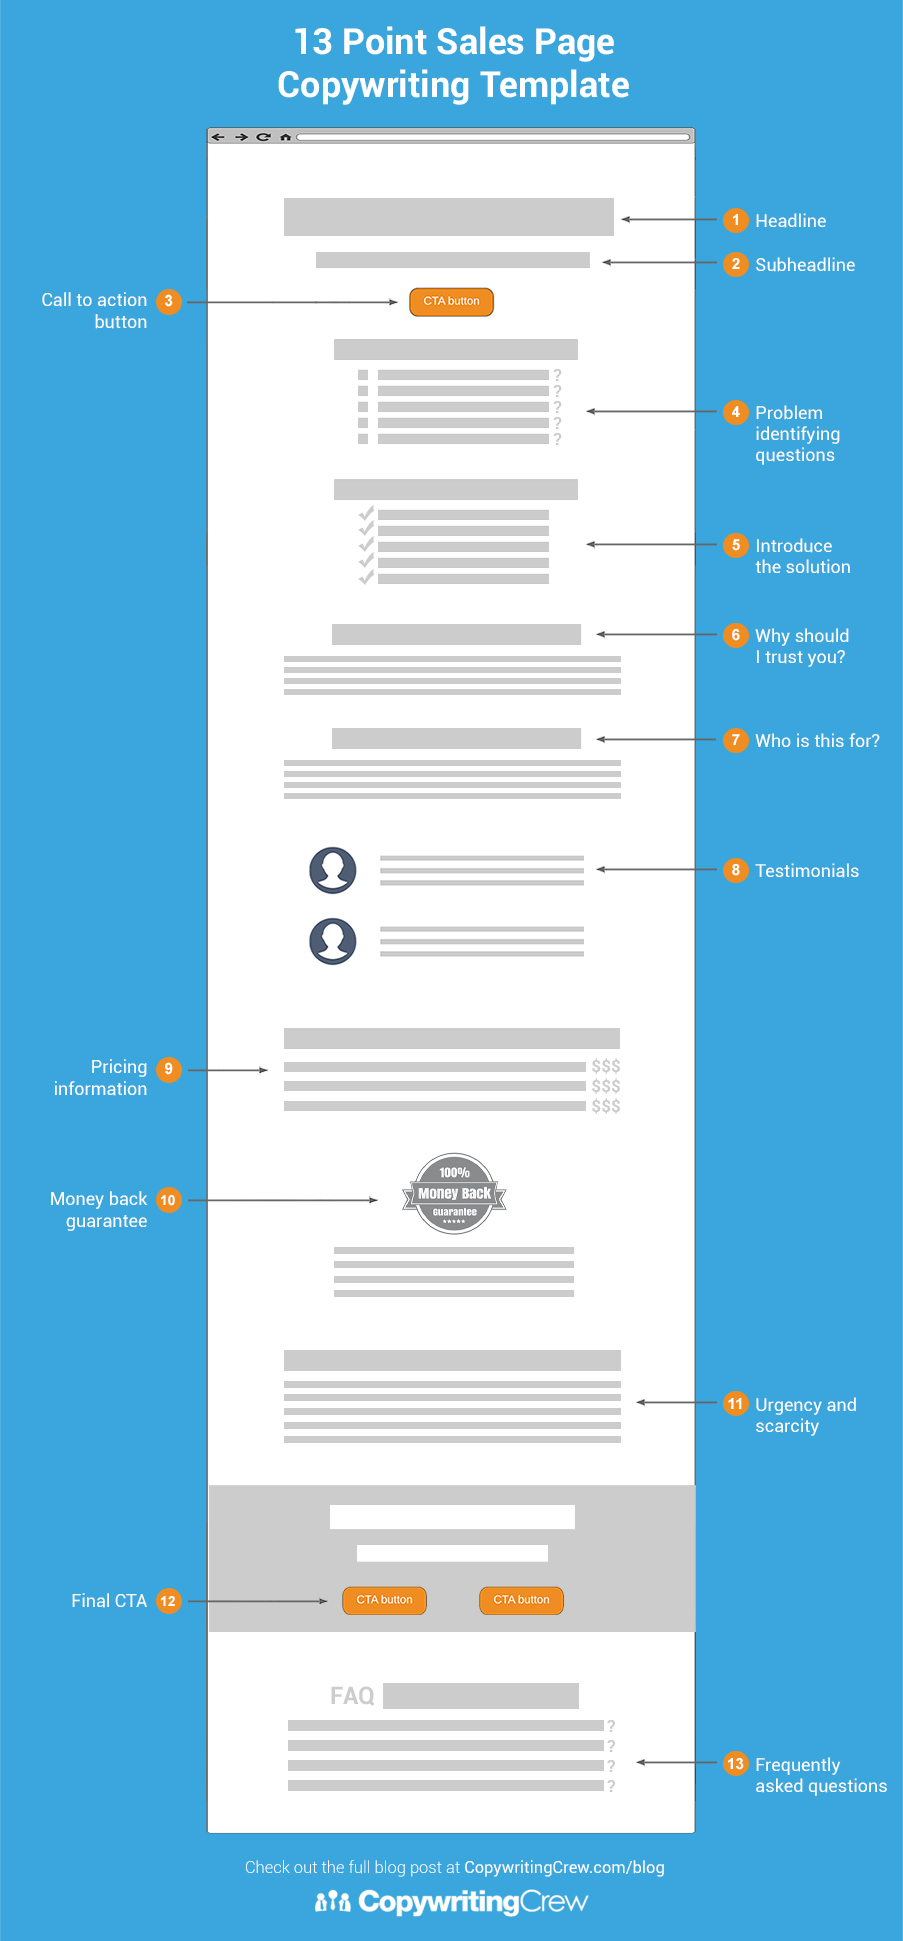 13 Point Sales Page Copywriting Template - wireframe infographic